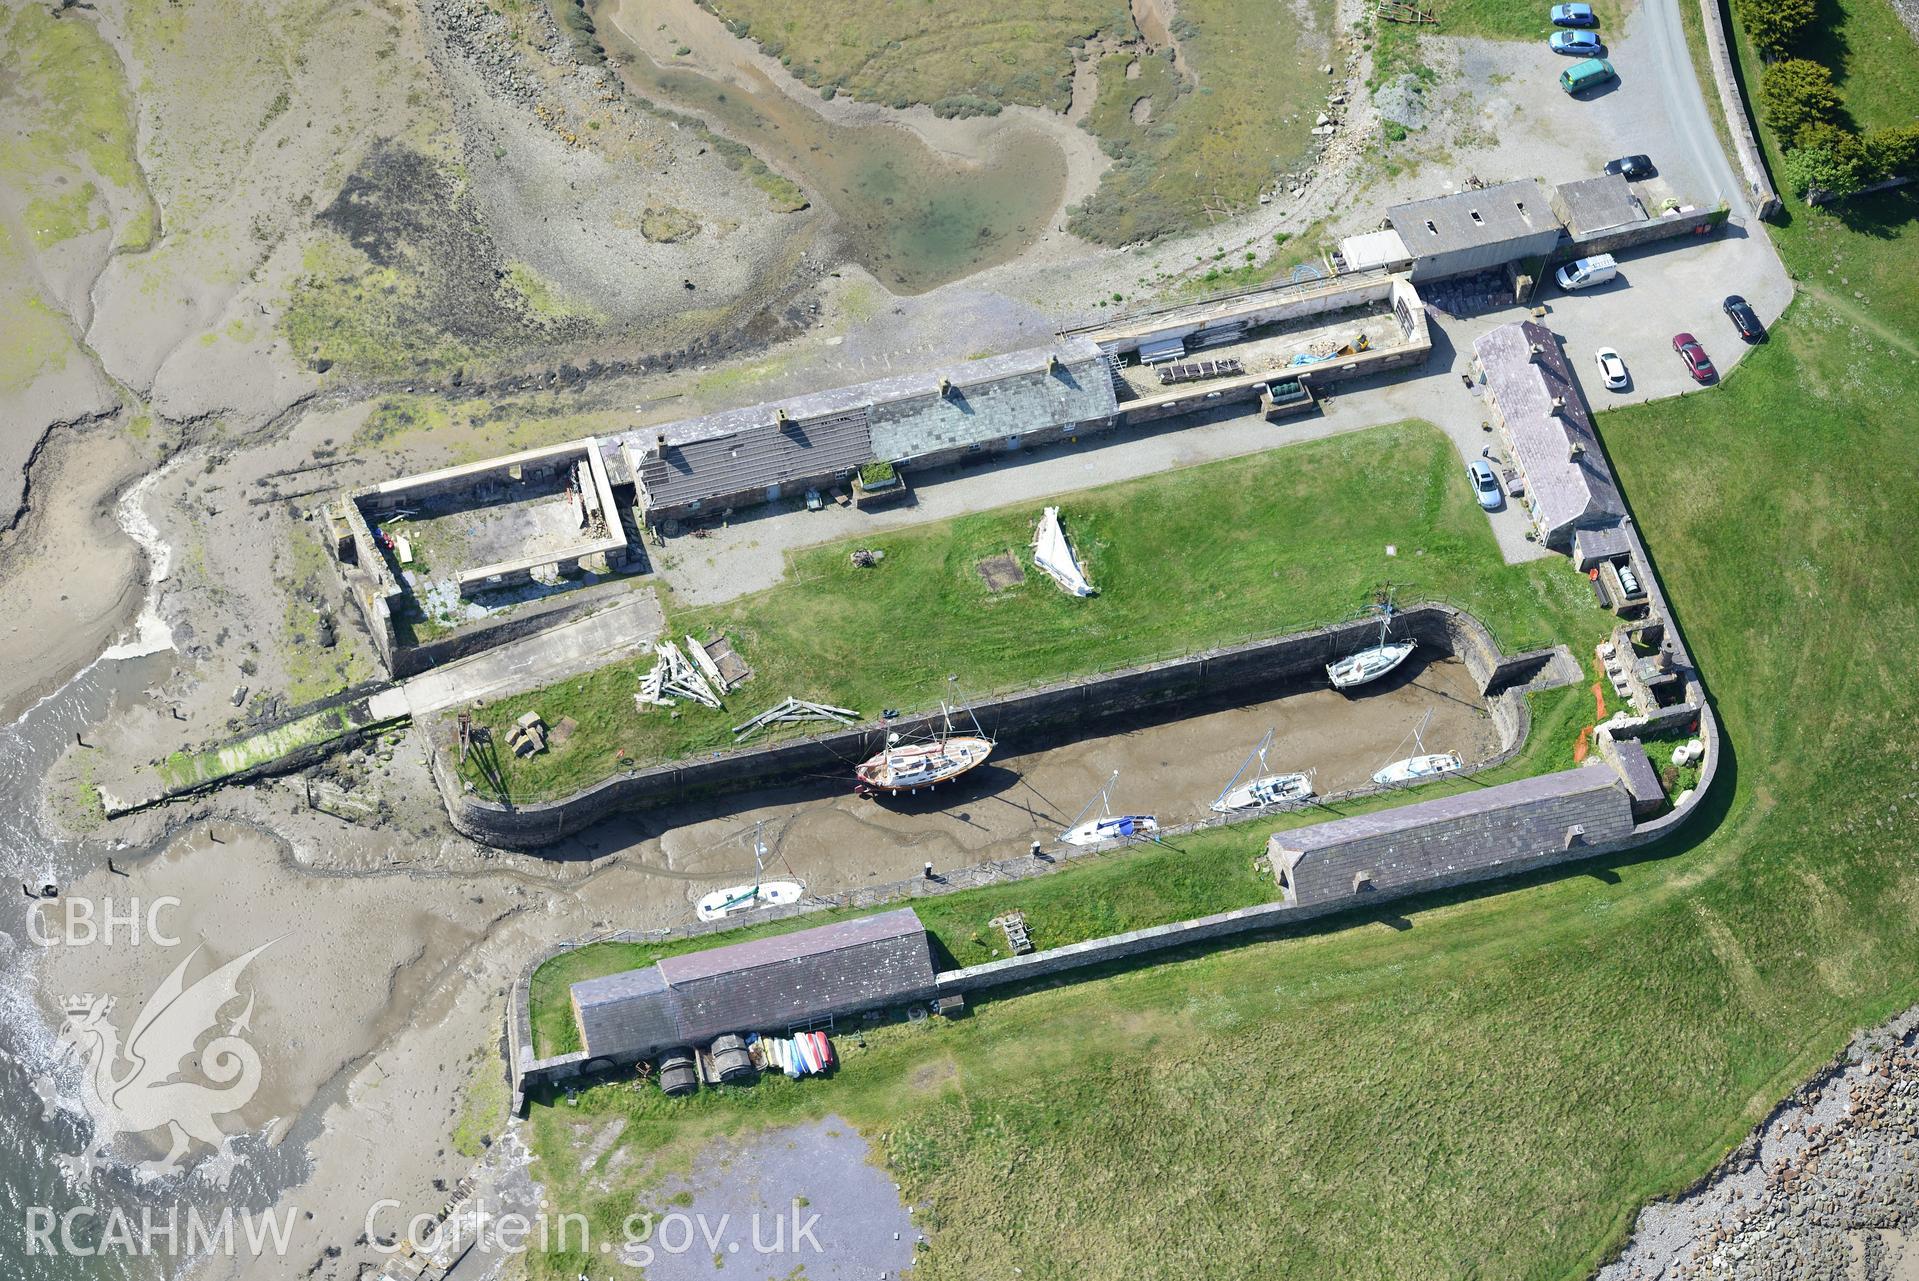 Aerial photography of Fort Belan taken on 3rd May 2017.  Baseline aerial reconnaissance survey for the CHERISH Project. ? Crown: CHERISH PROJECT 2017. Produced with EU funds through the Ireland Wales Co-operation Programme 2014-2020. All material made fr